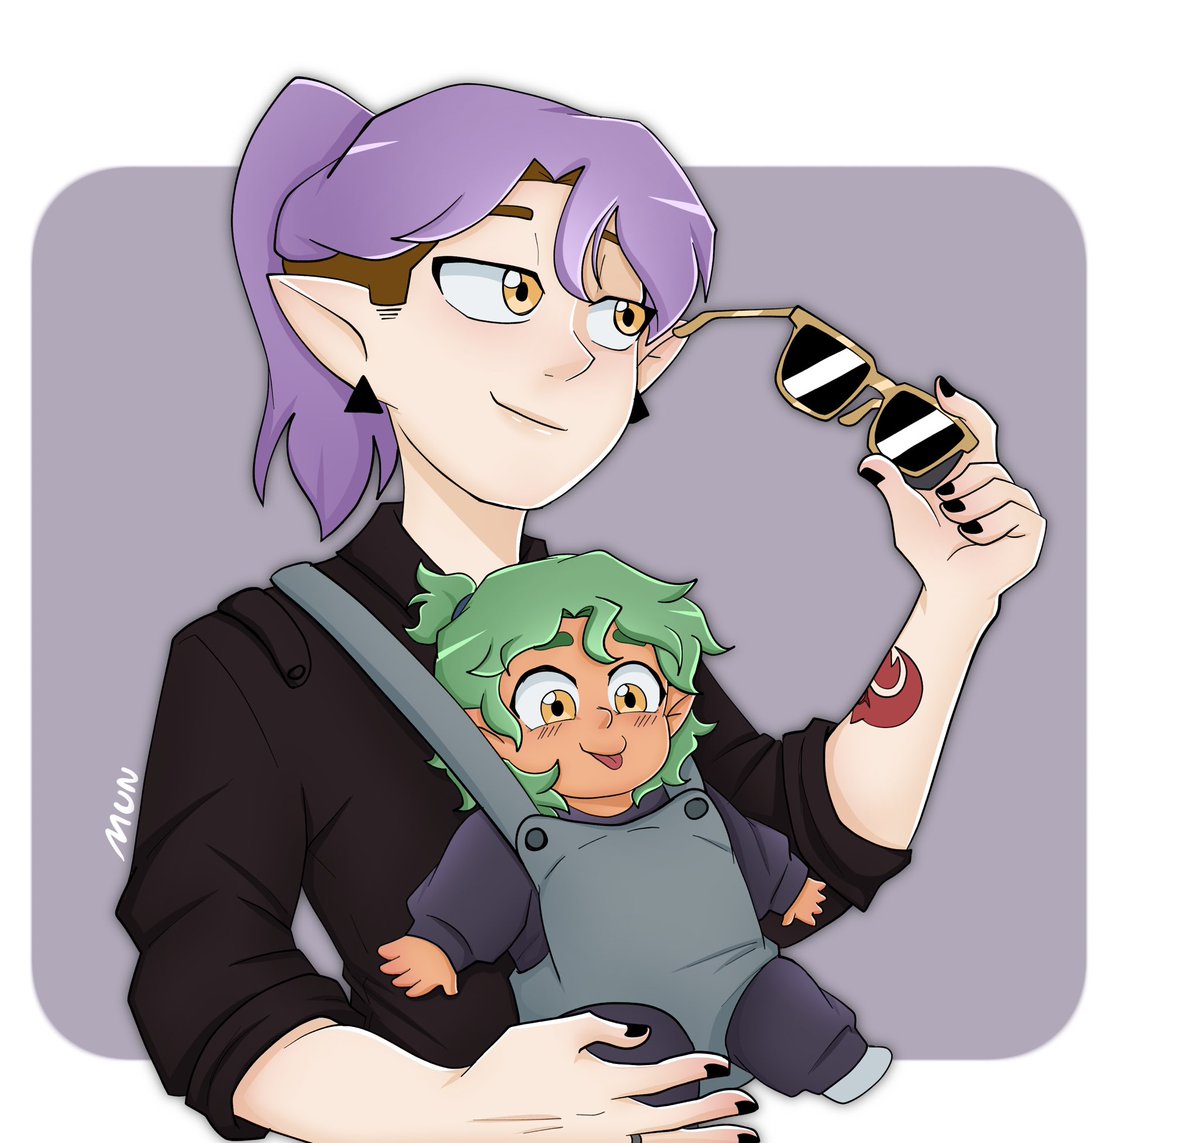 -Cool Mom- Cool Amity with her baby! 😎 Art is made by @Munsitart #TheOwlHouse #theowlhousefanart #toh #tohfanart #Amity #tohAmity #tohfankid